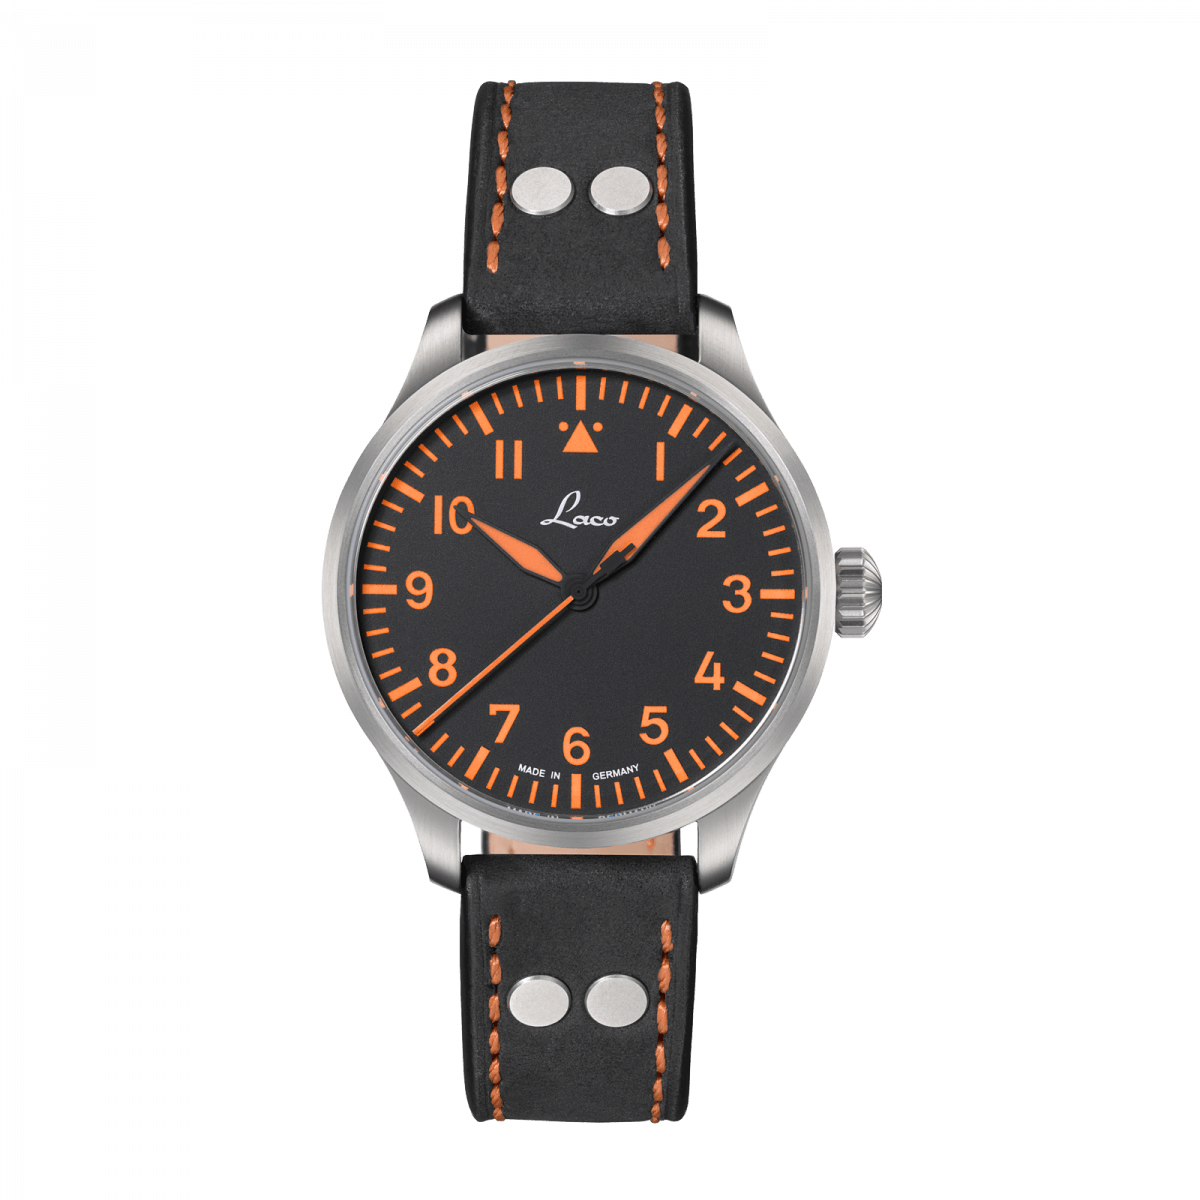 The Laco Edition 97 is a classic Type B pilot's watch in bronze